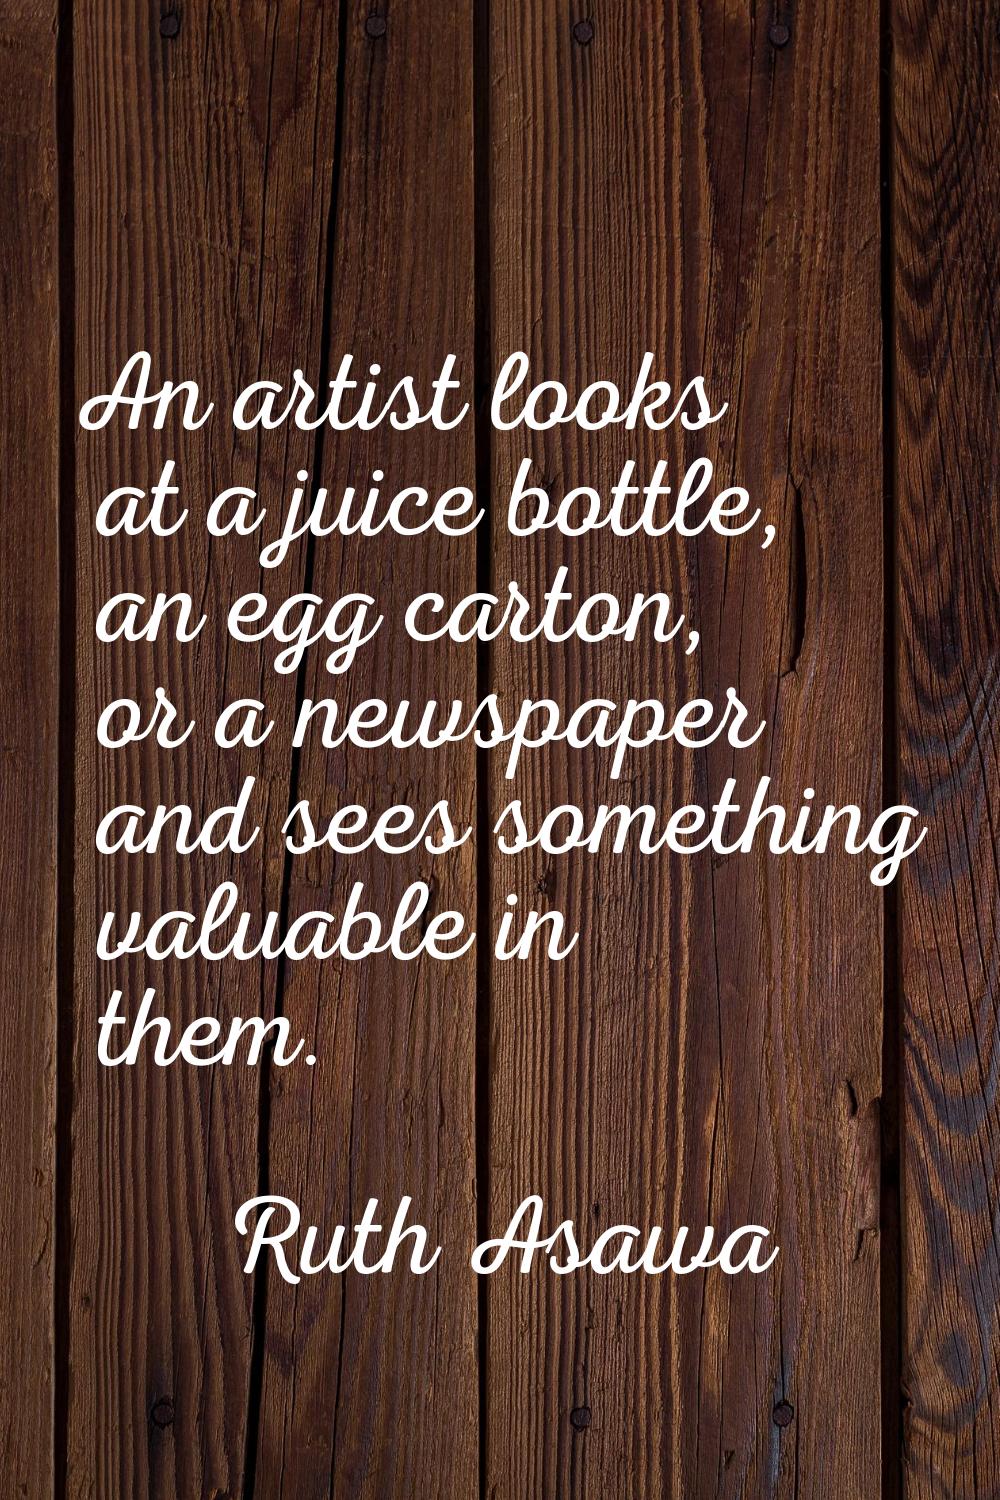 An artist looks at a juice bottle, an egg carton, or a newspaper and sees something valuable in the